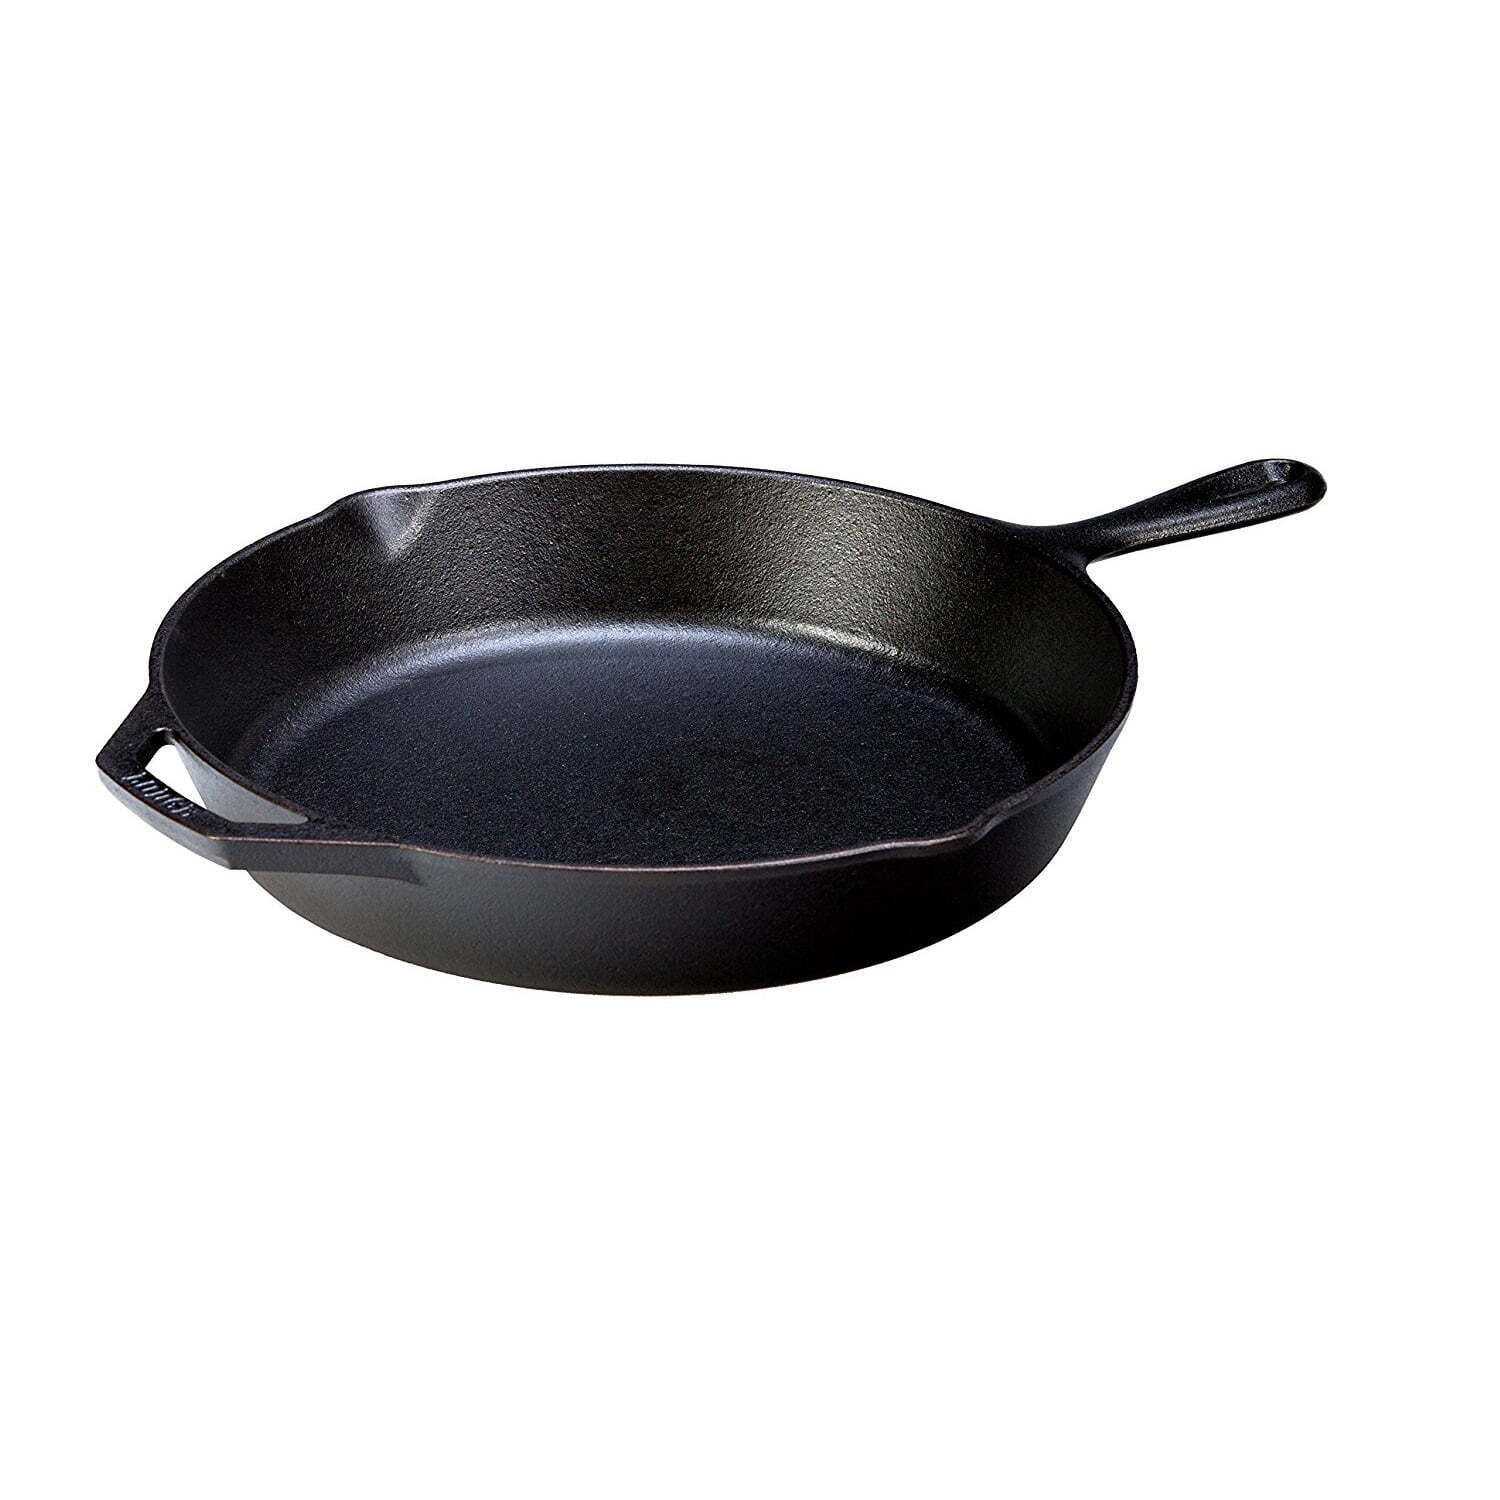 Pre-Seasoned 12 Inch. Cast Iron Skillet with Assist Handle